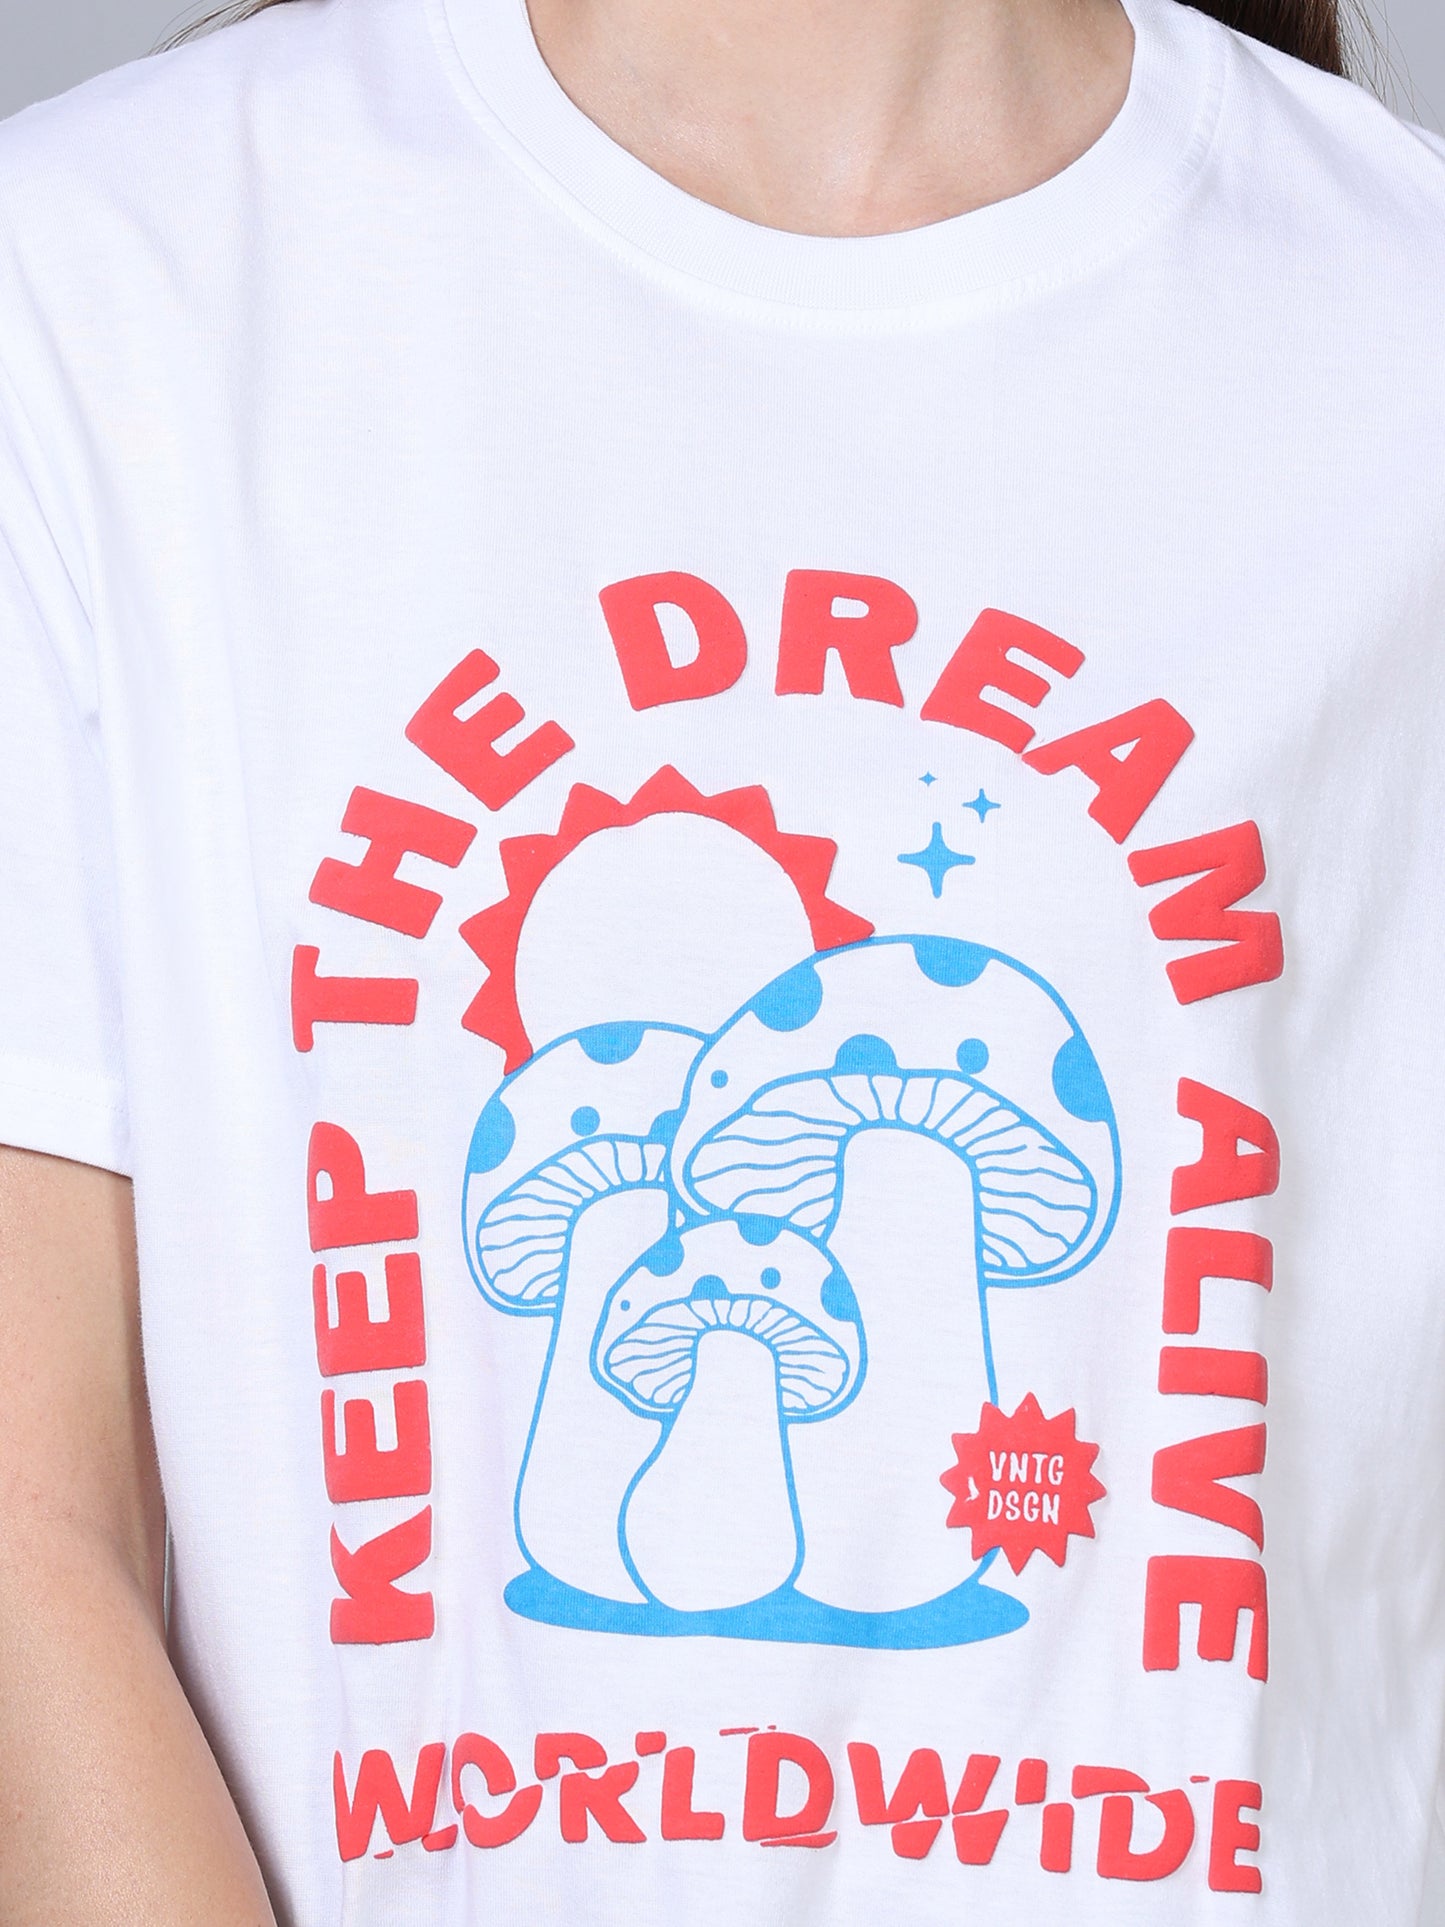 Women KEEP THE DREAMS ALIVE Printed Relaxed Fit T-Shirt